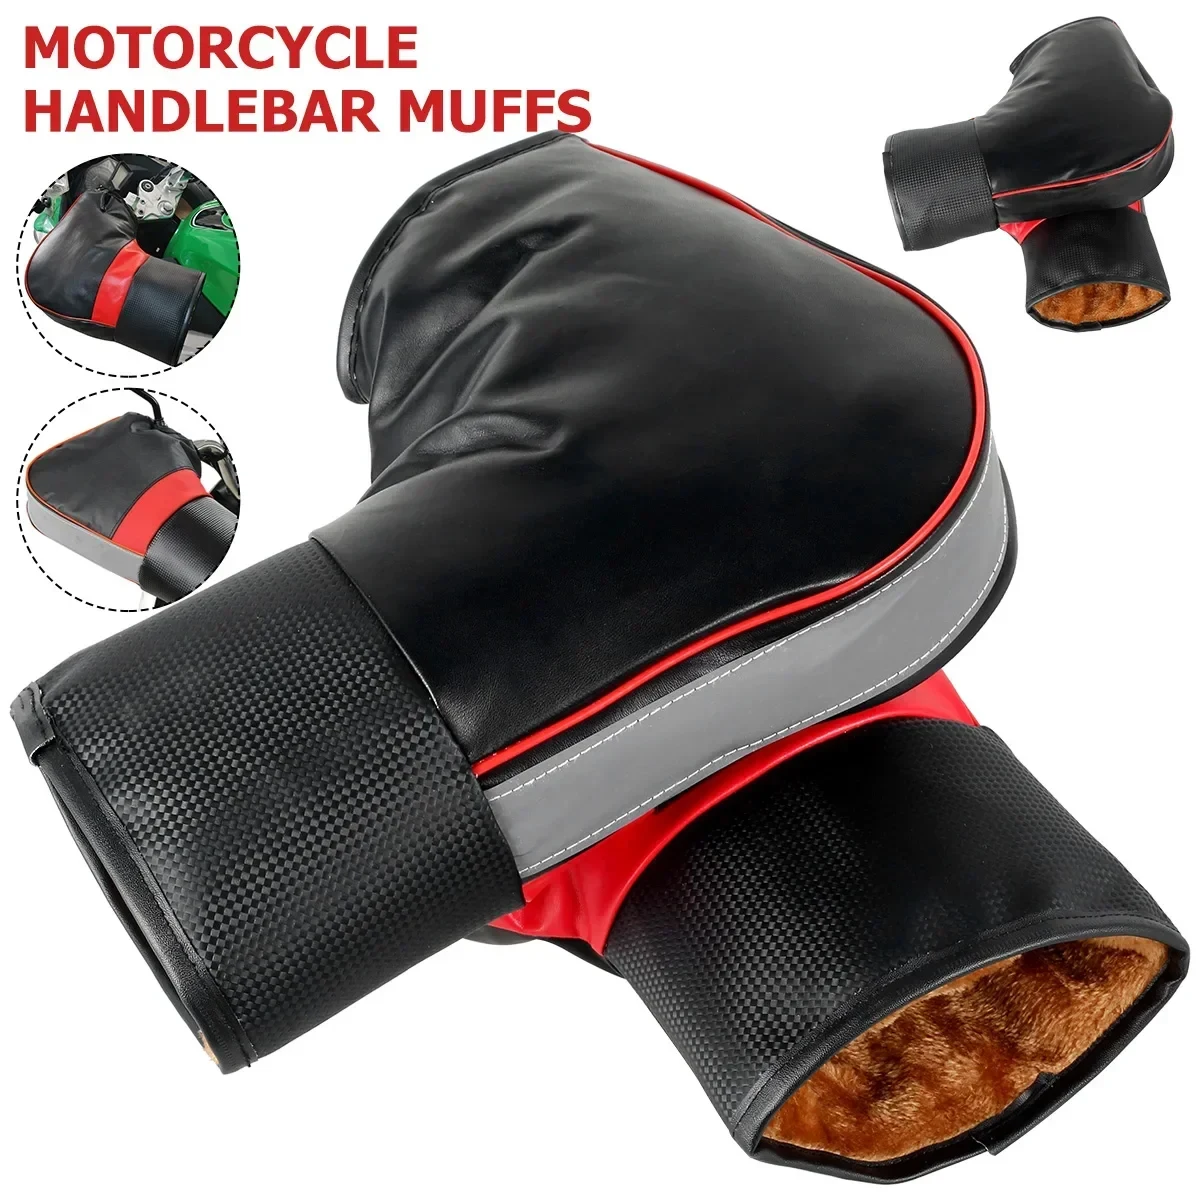 

1Pair Motorcycle Handlebar Muffs Protective Motorcycle Scooter Thick Warm Grip Handle Bar Muff Rainproof Winter Warmer Gloves